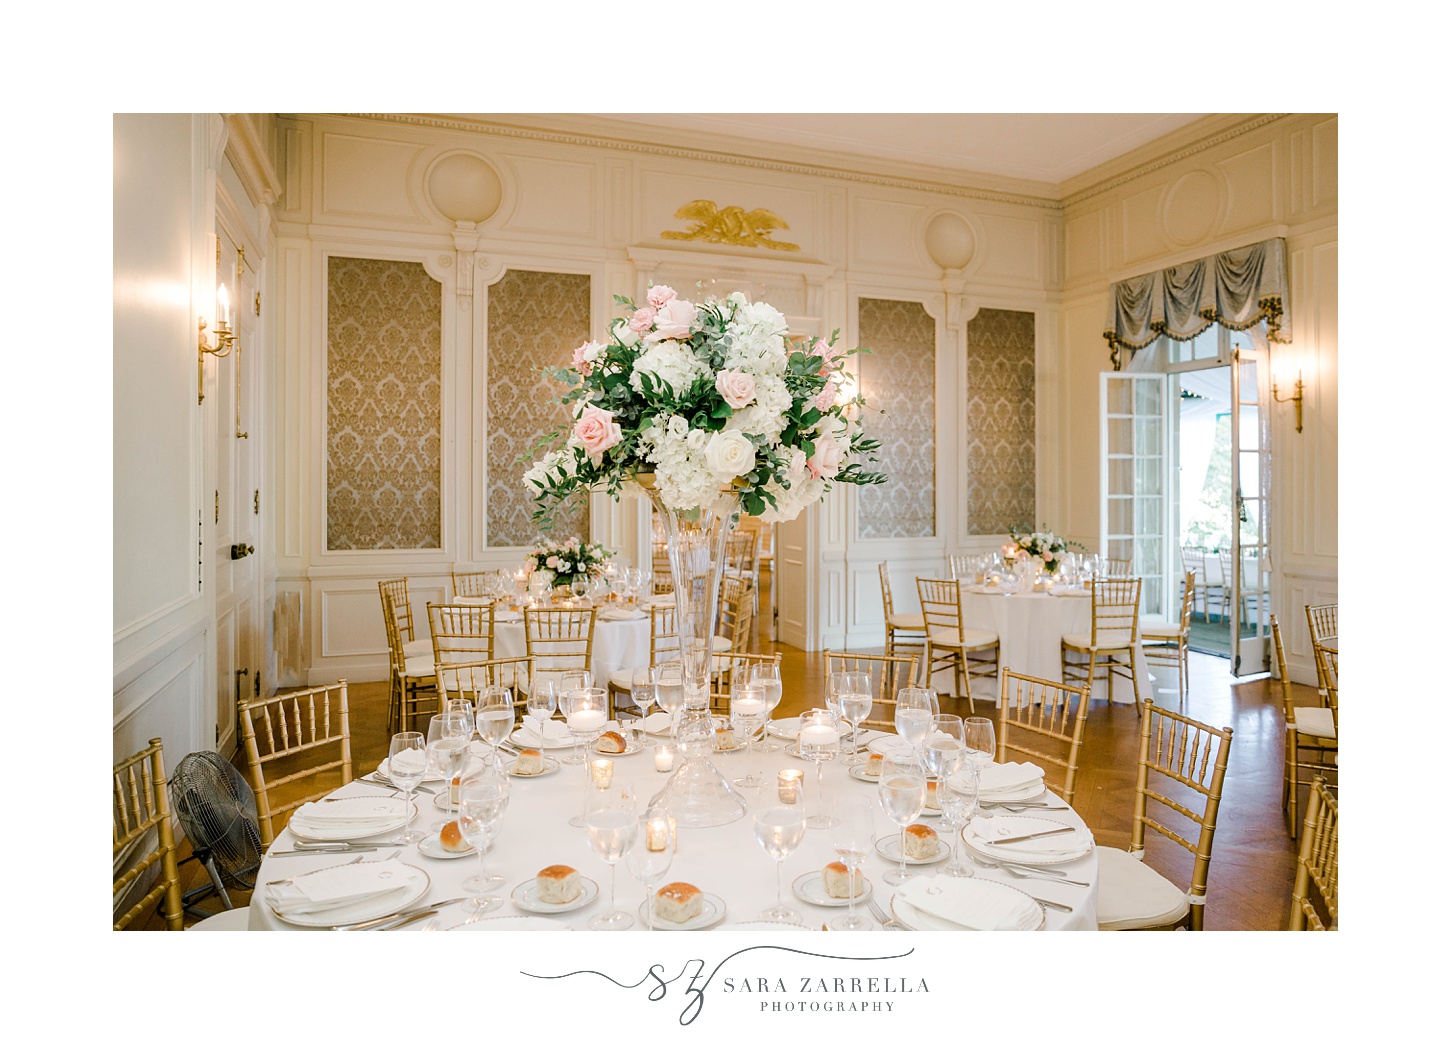 Glen Manor House wedding reception with gold and white details 